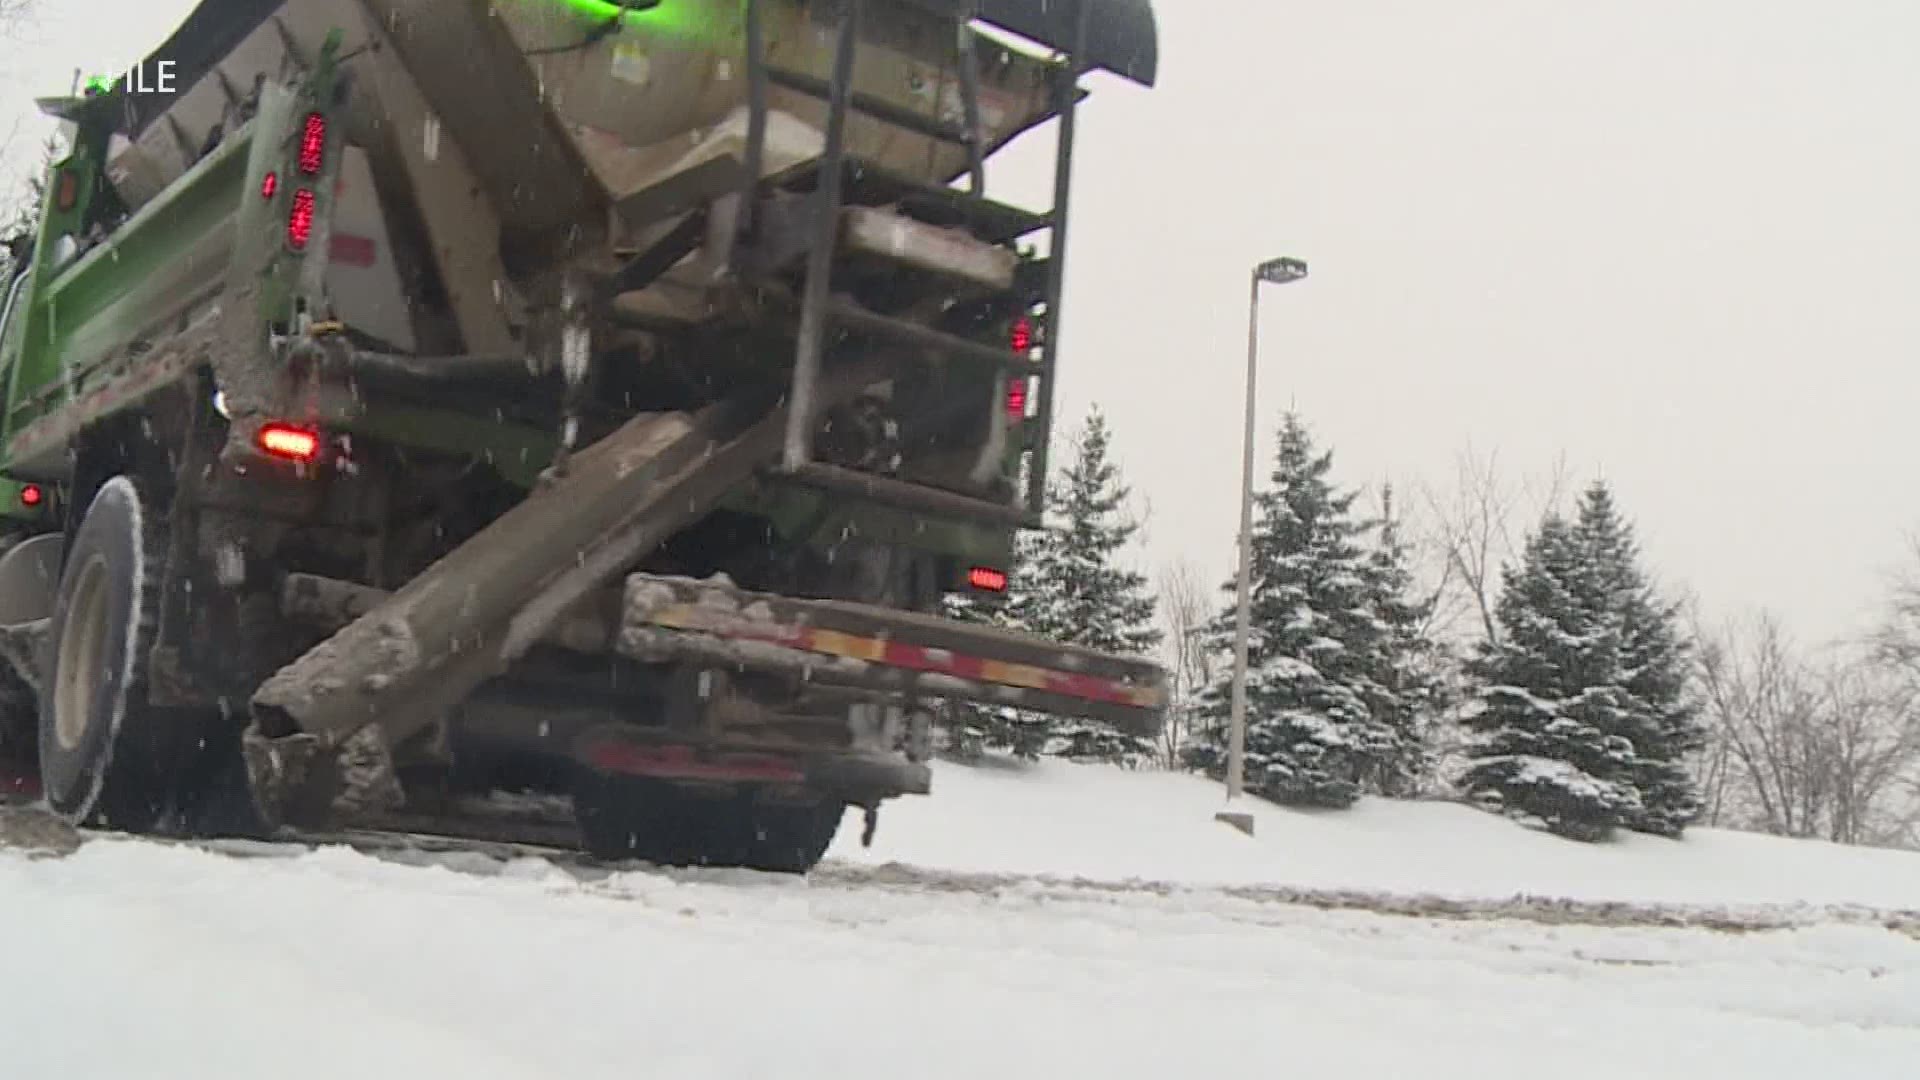 Winter weather will arrive in West Michigan soon and road commissions are preparing for it now.